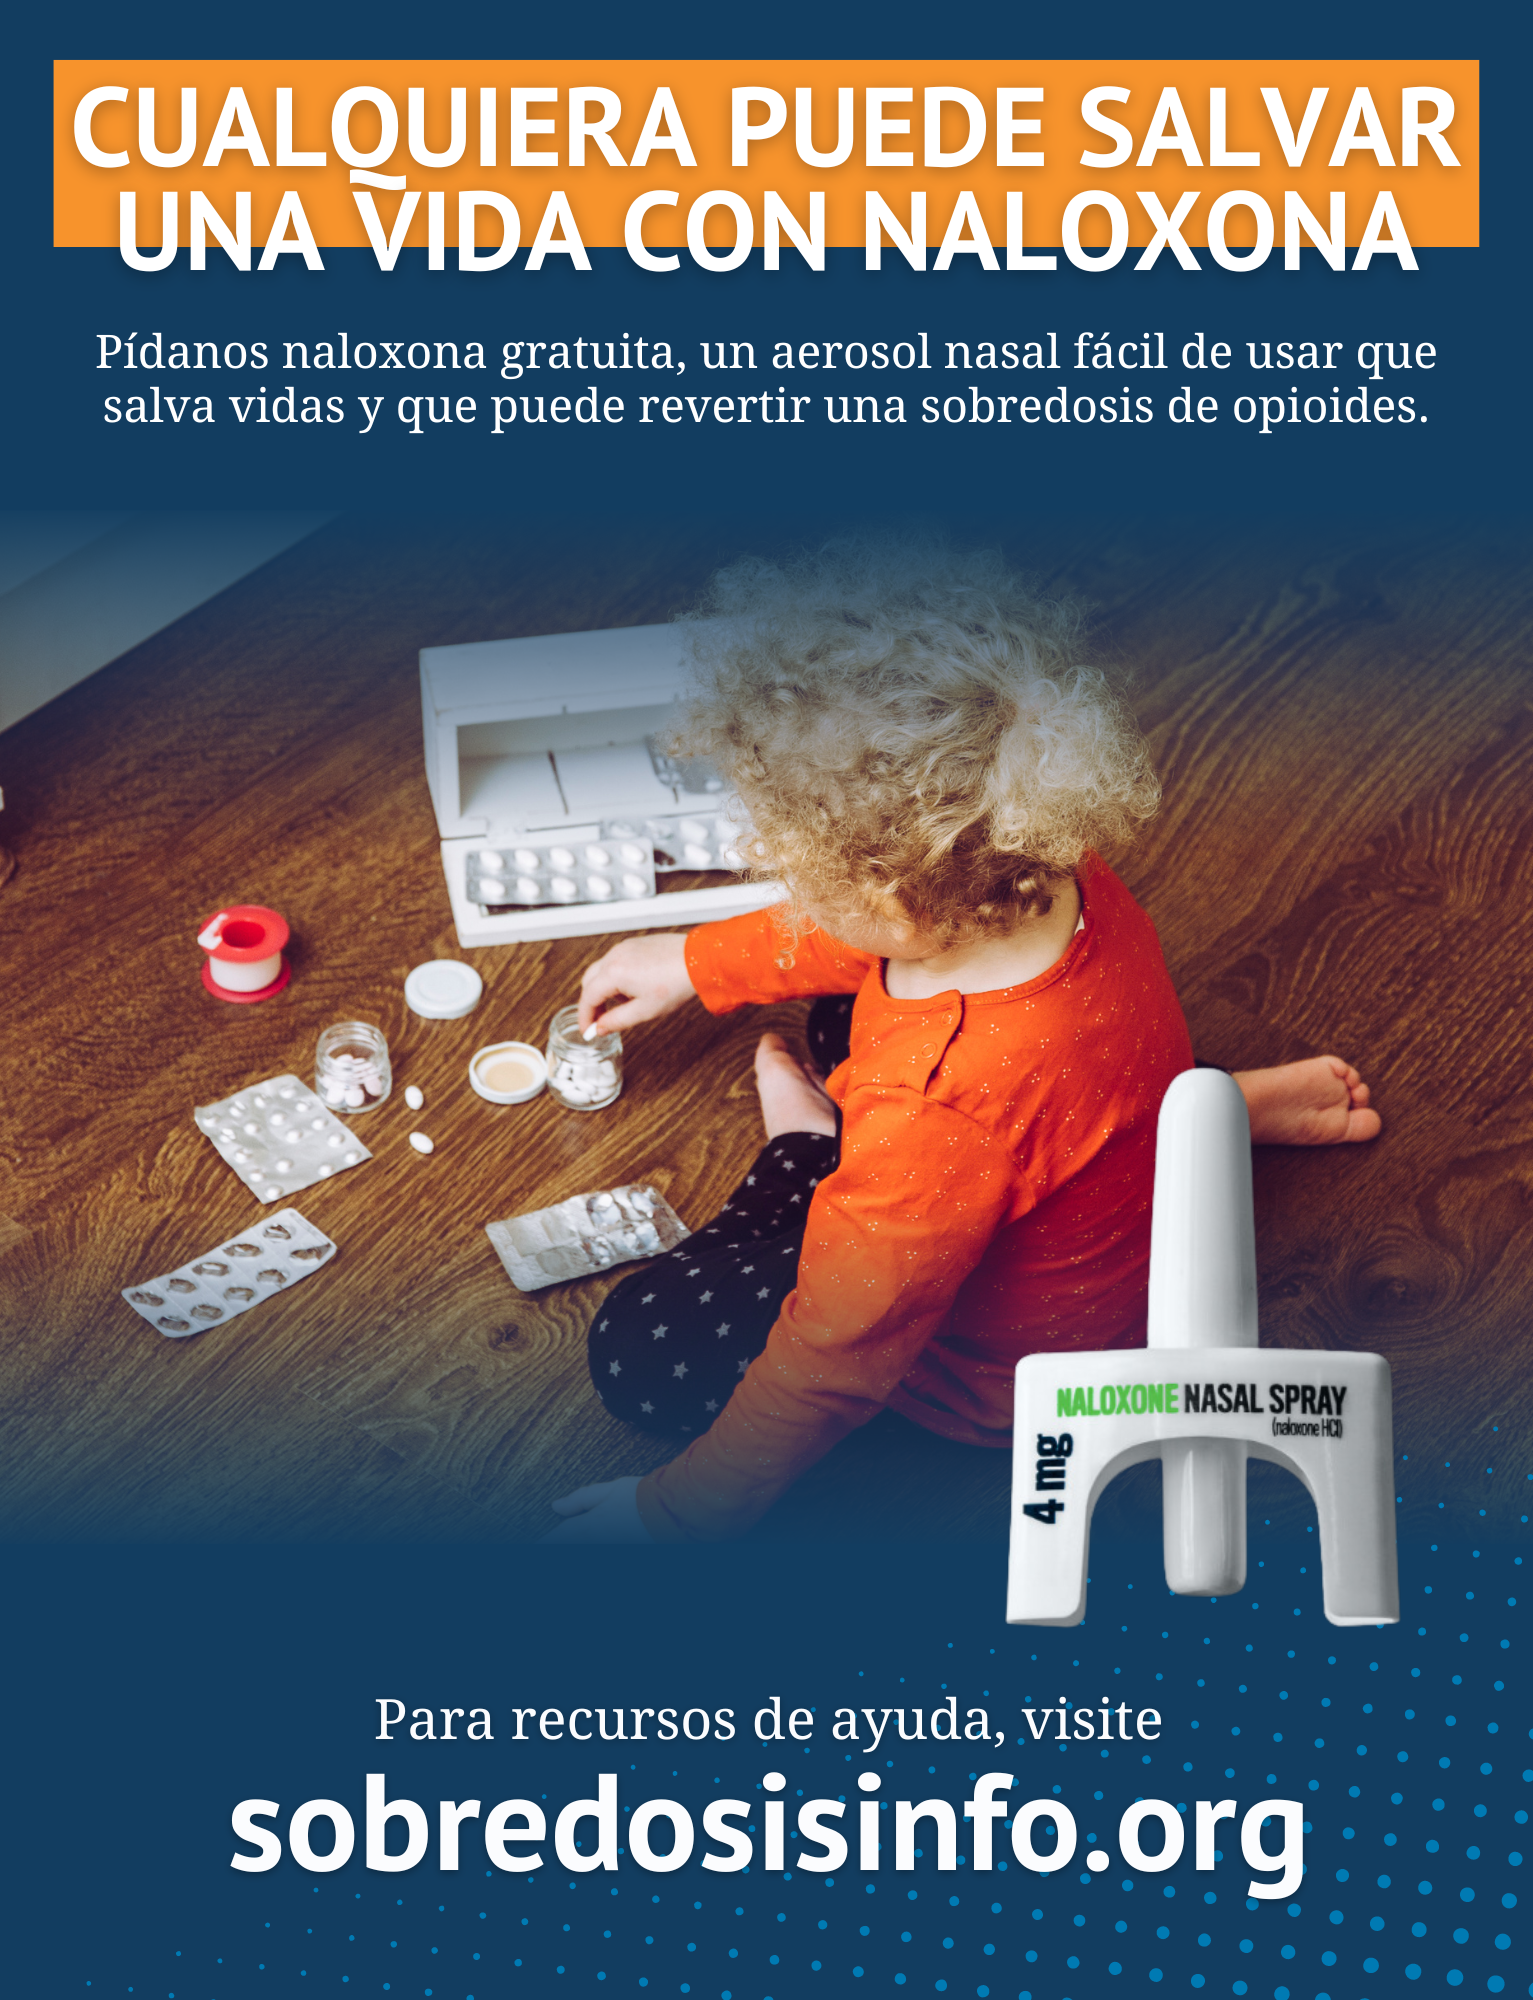 Anyone can save a life with naloxone poster 11.5 x 15 (8).png